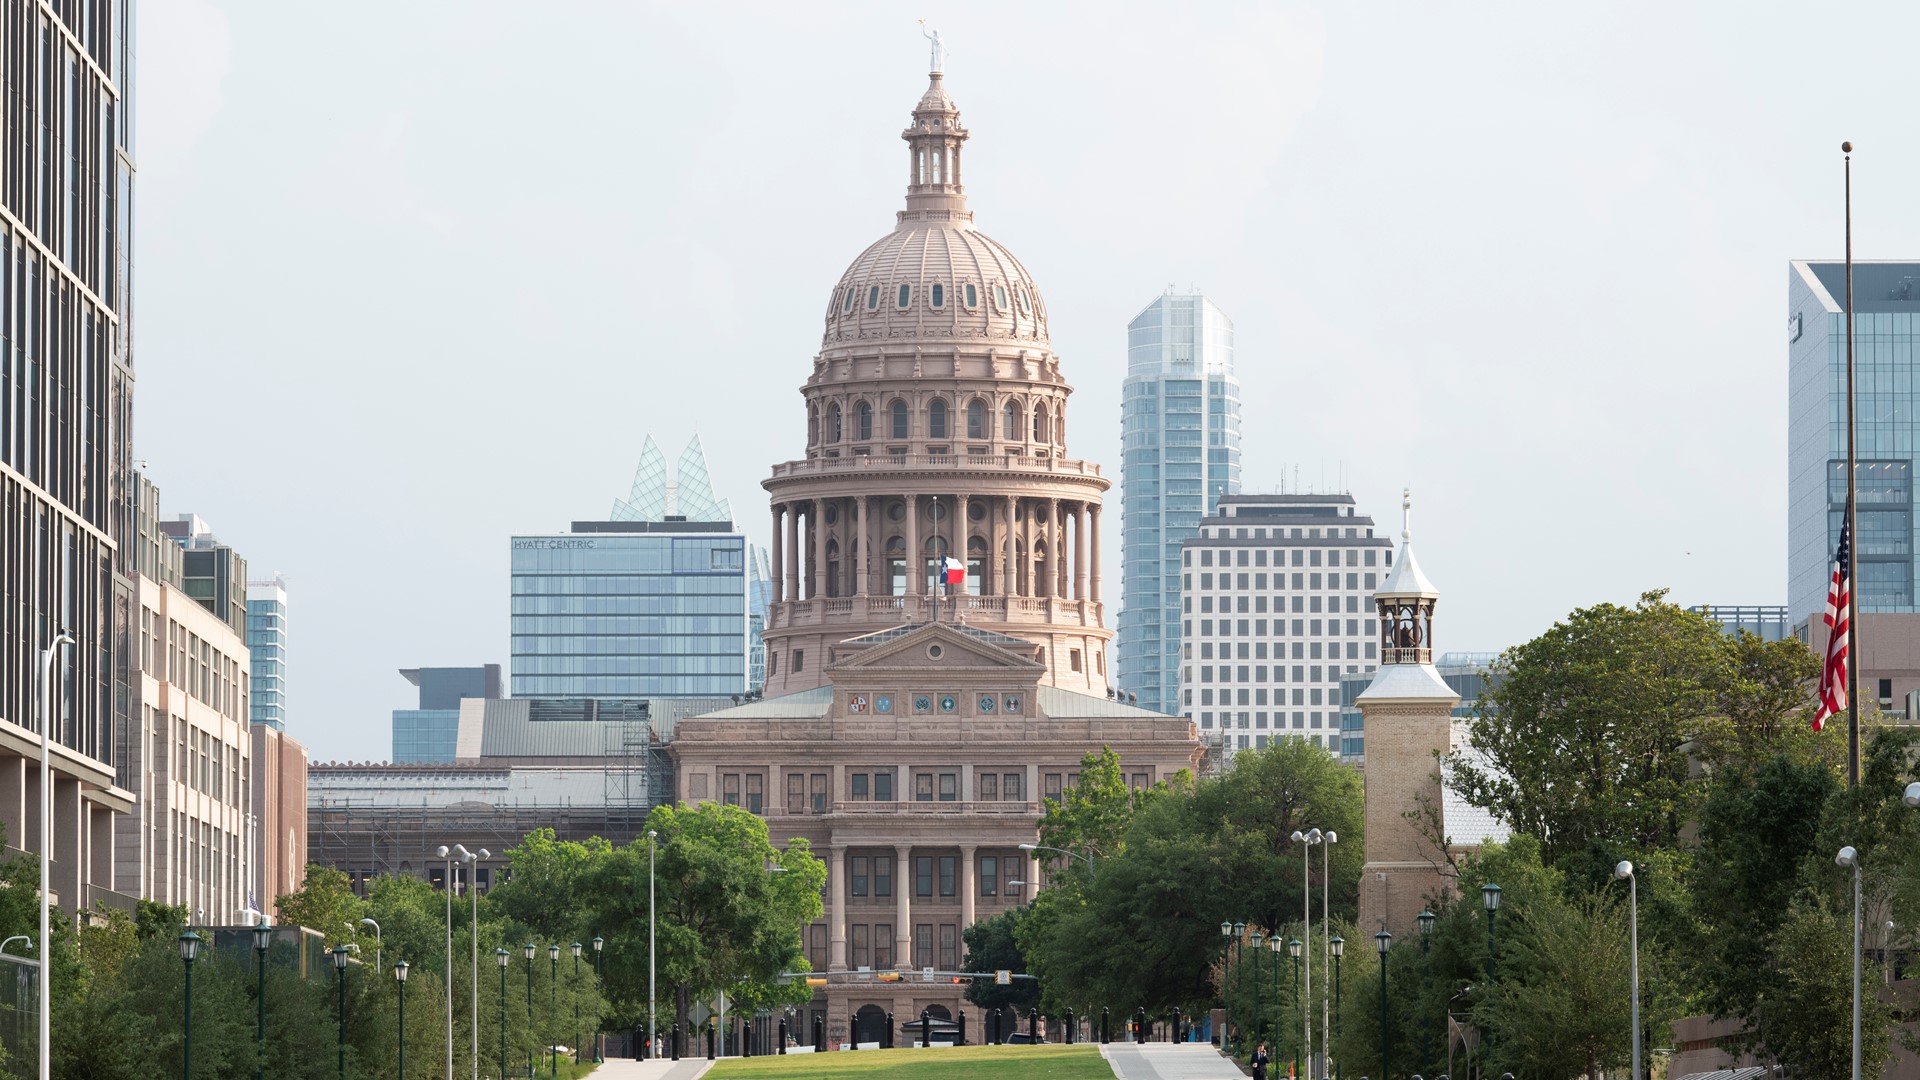 Midnight is the last time for the Texas House to take initial votes on any Senate bills. But they still haven't gotten through some notable proposals.